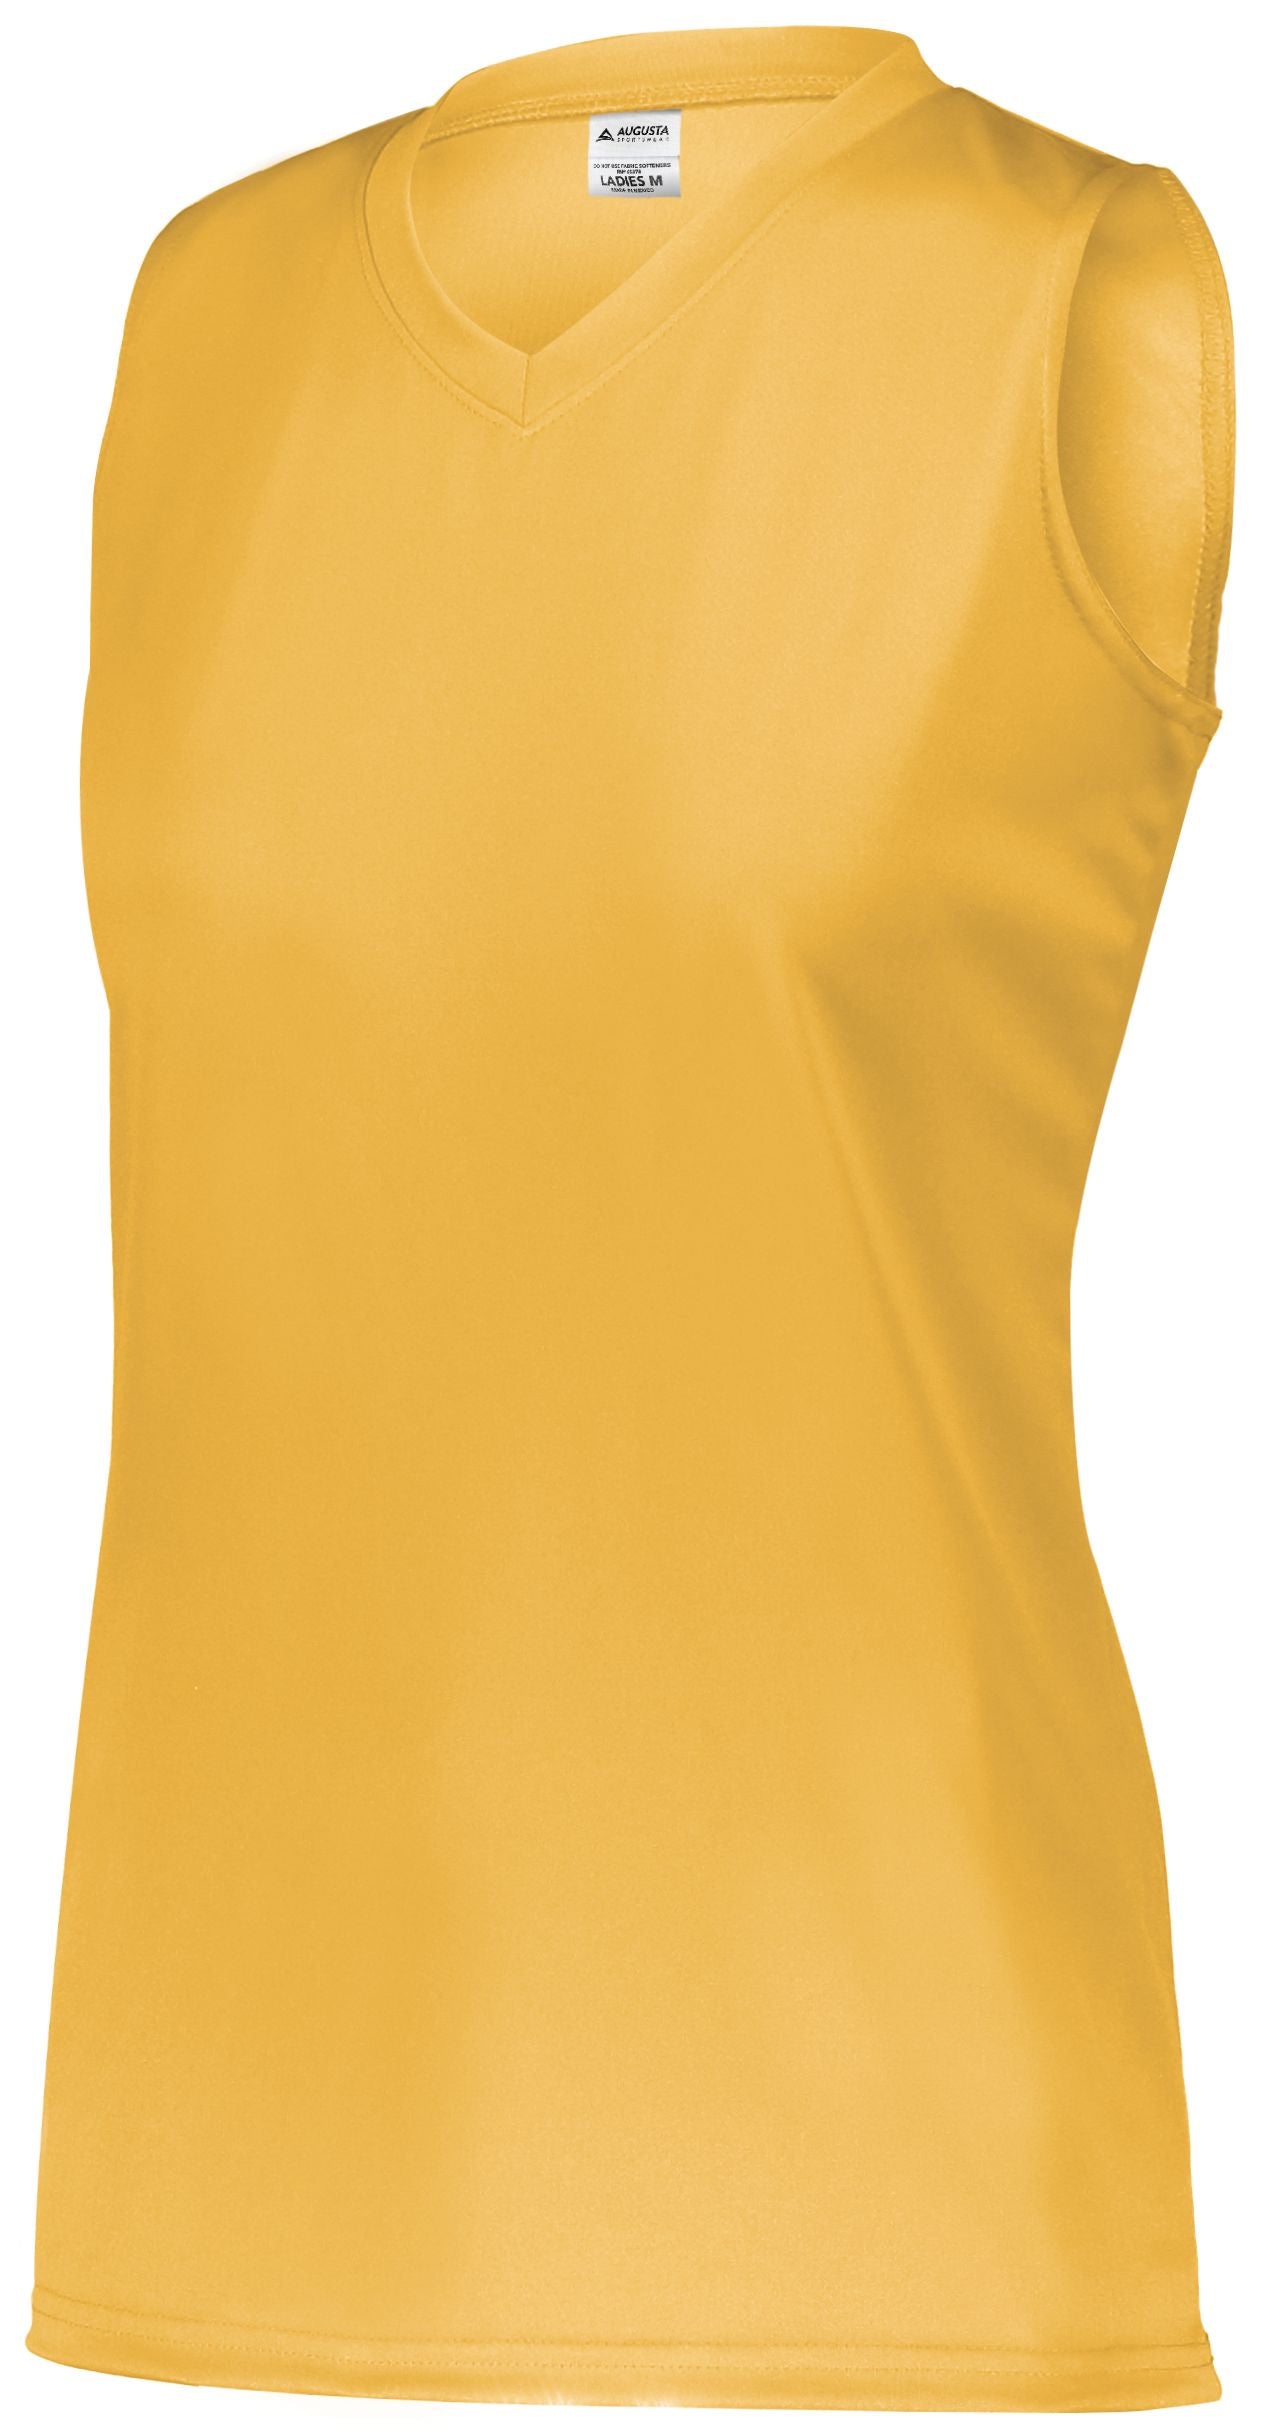 Augusta Sportswear Girls Attain Wicking Sleeveless Jersey in Gold  -Part of the Girls, Augusta-Products, Softball, Girls-Jersey, Shirts product lines at KanaleyCreations.com